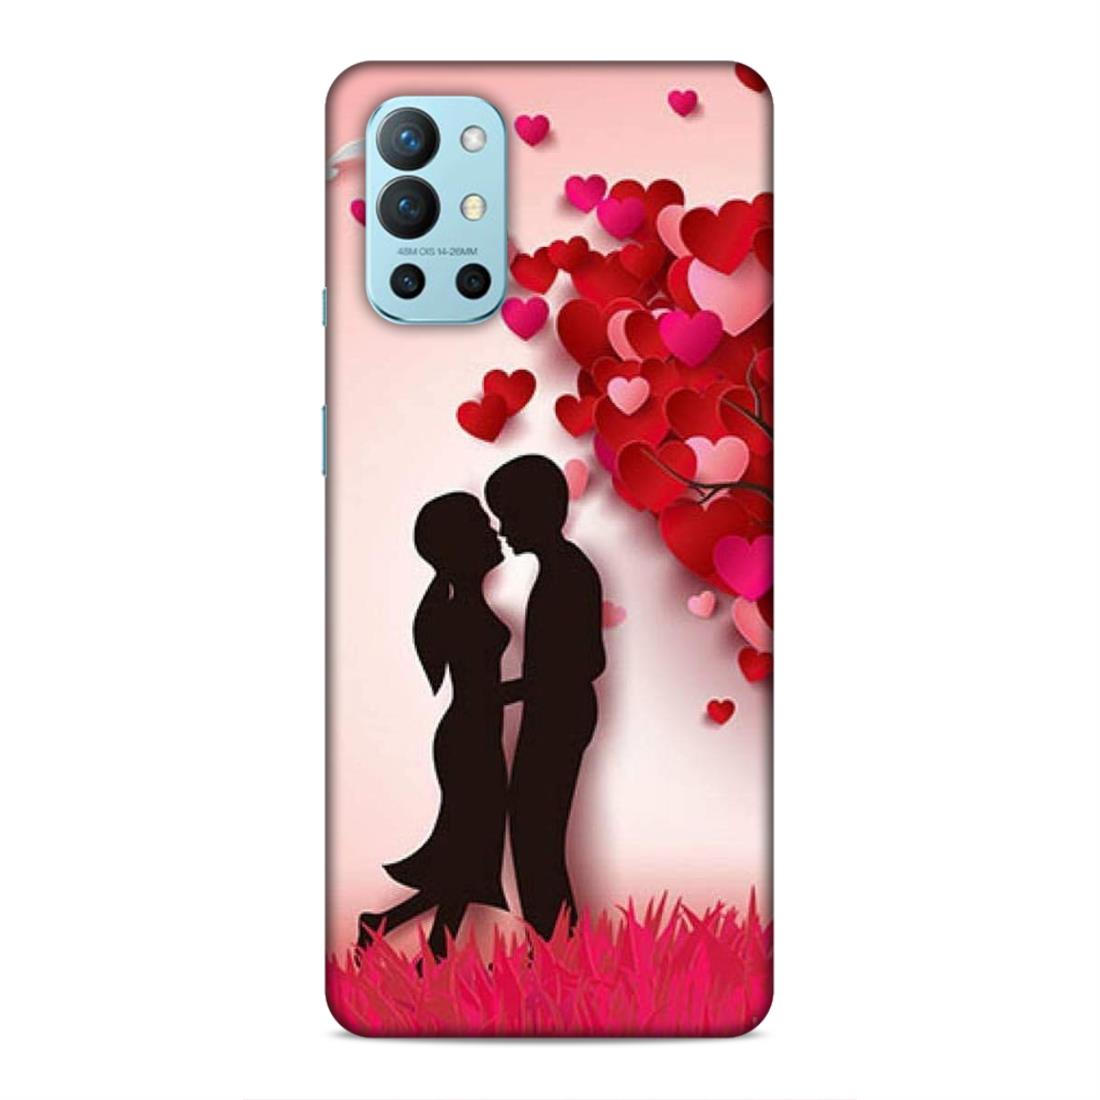 Couple Love Hard Back Case For OnePlus 8T / 9R